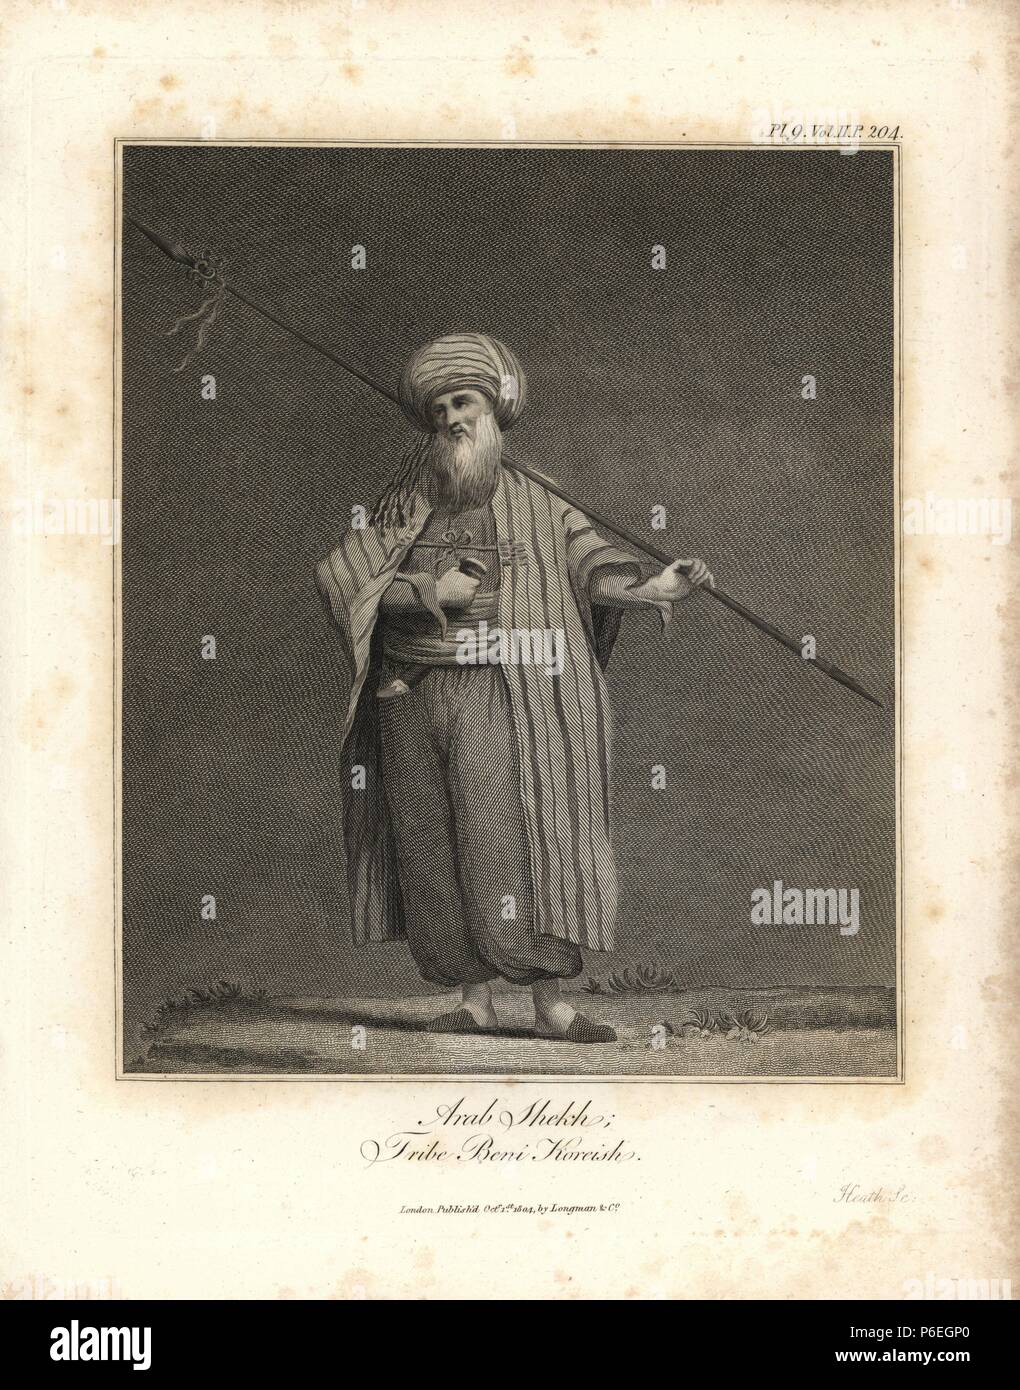 Arab sheikh, tribe Beni Koreish, in turban and robes, with spear and dagger. Copperplate engraving from James Bruce's 'Travels to Discover the Source of the Nile, in the years 1768, 1769, 1770, 1771, 1772 and 1773,' London, 1790. James Bruce (1730-1794) was a Scottish explorer and travel writer who spent more than 12 years in North Africa and Ethiopia. Engraved by Heath after an original drawing by Bruce. Stock Photo